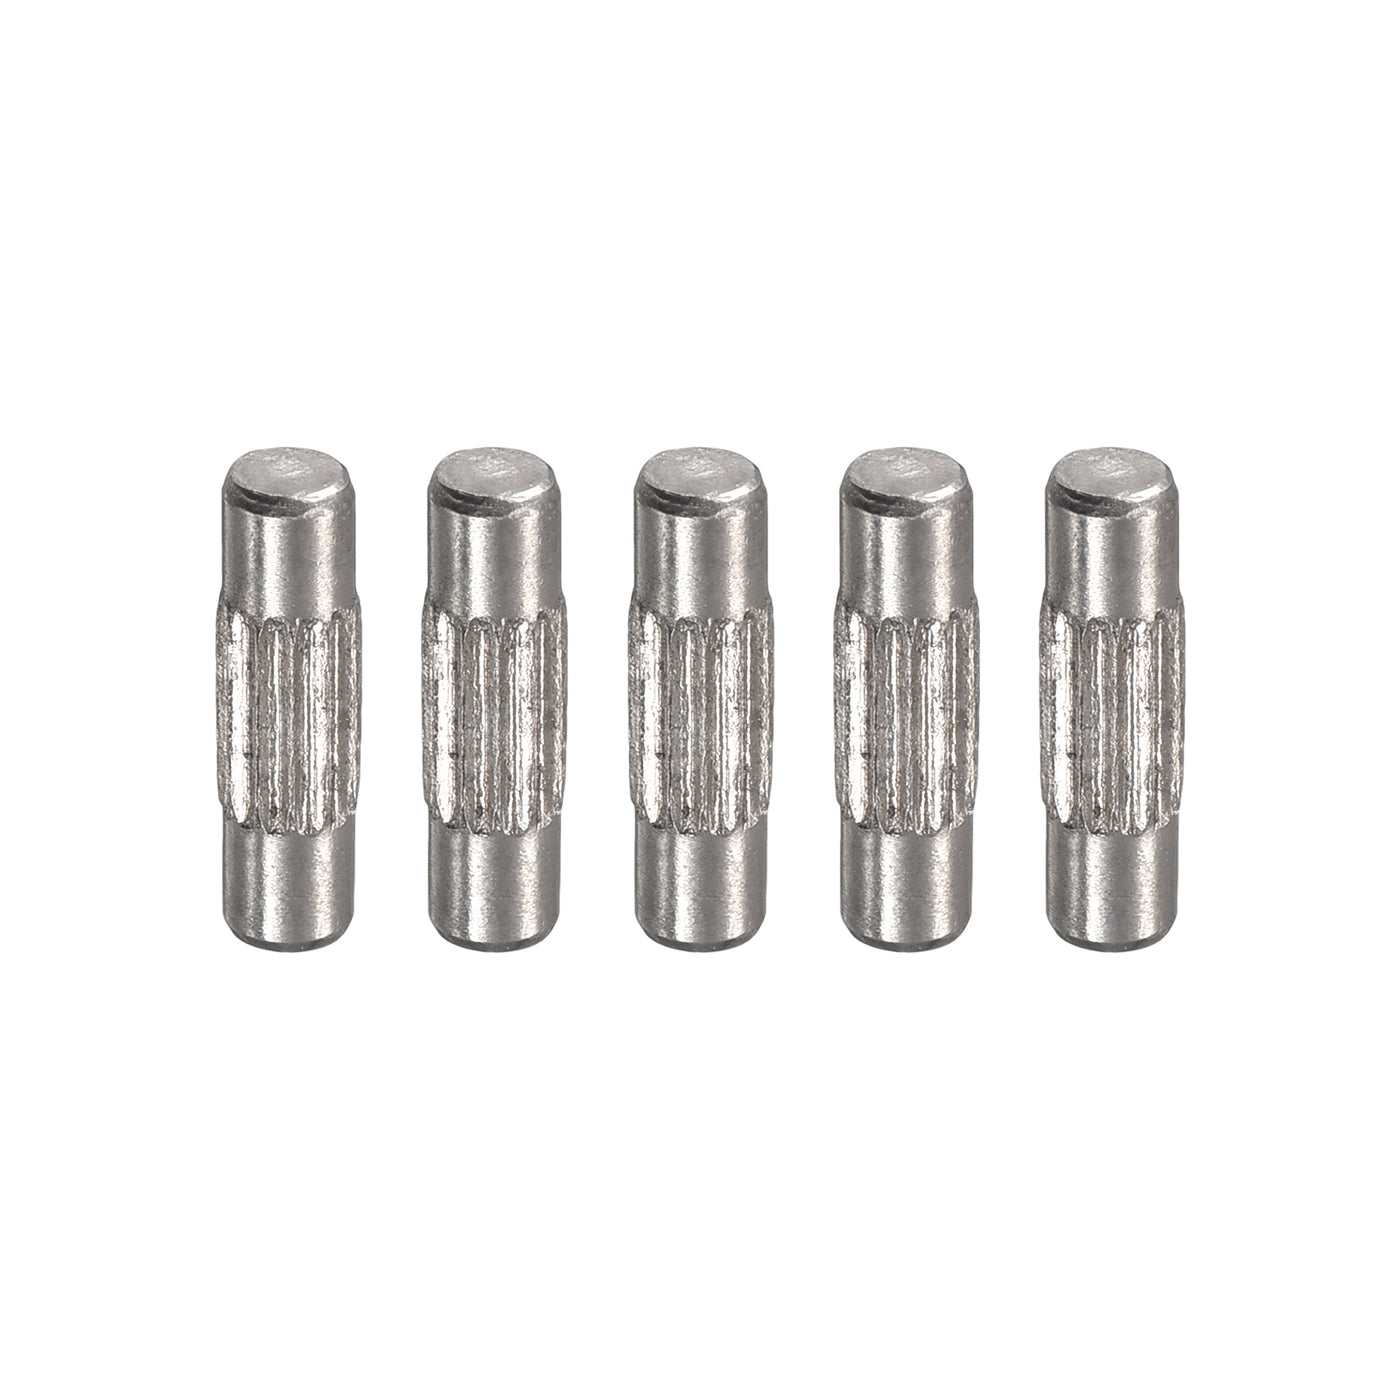 uxcell Uxcell 3x10mm 304 Stainless Steel Dowel Pins, 5Pcs Center Knurled Chamfered End Pin